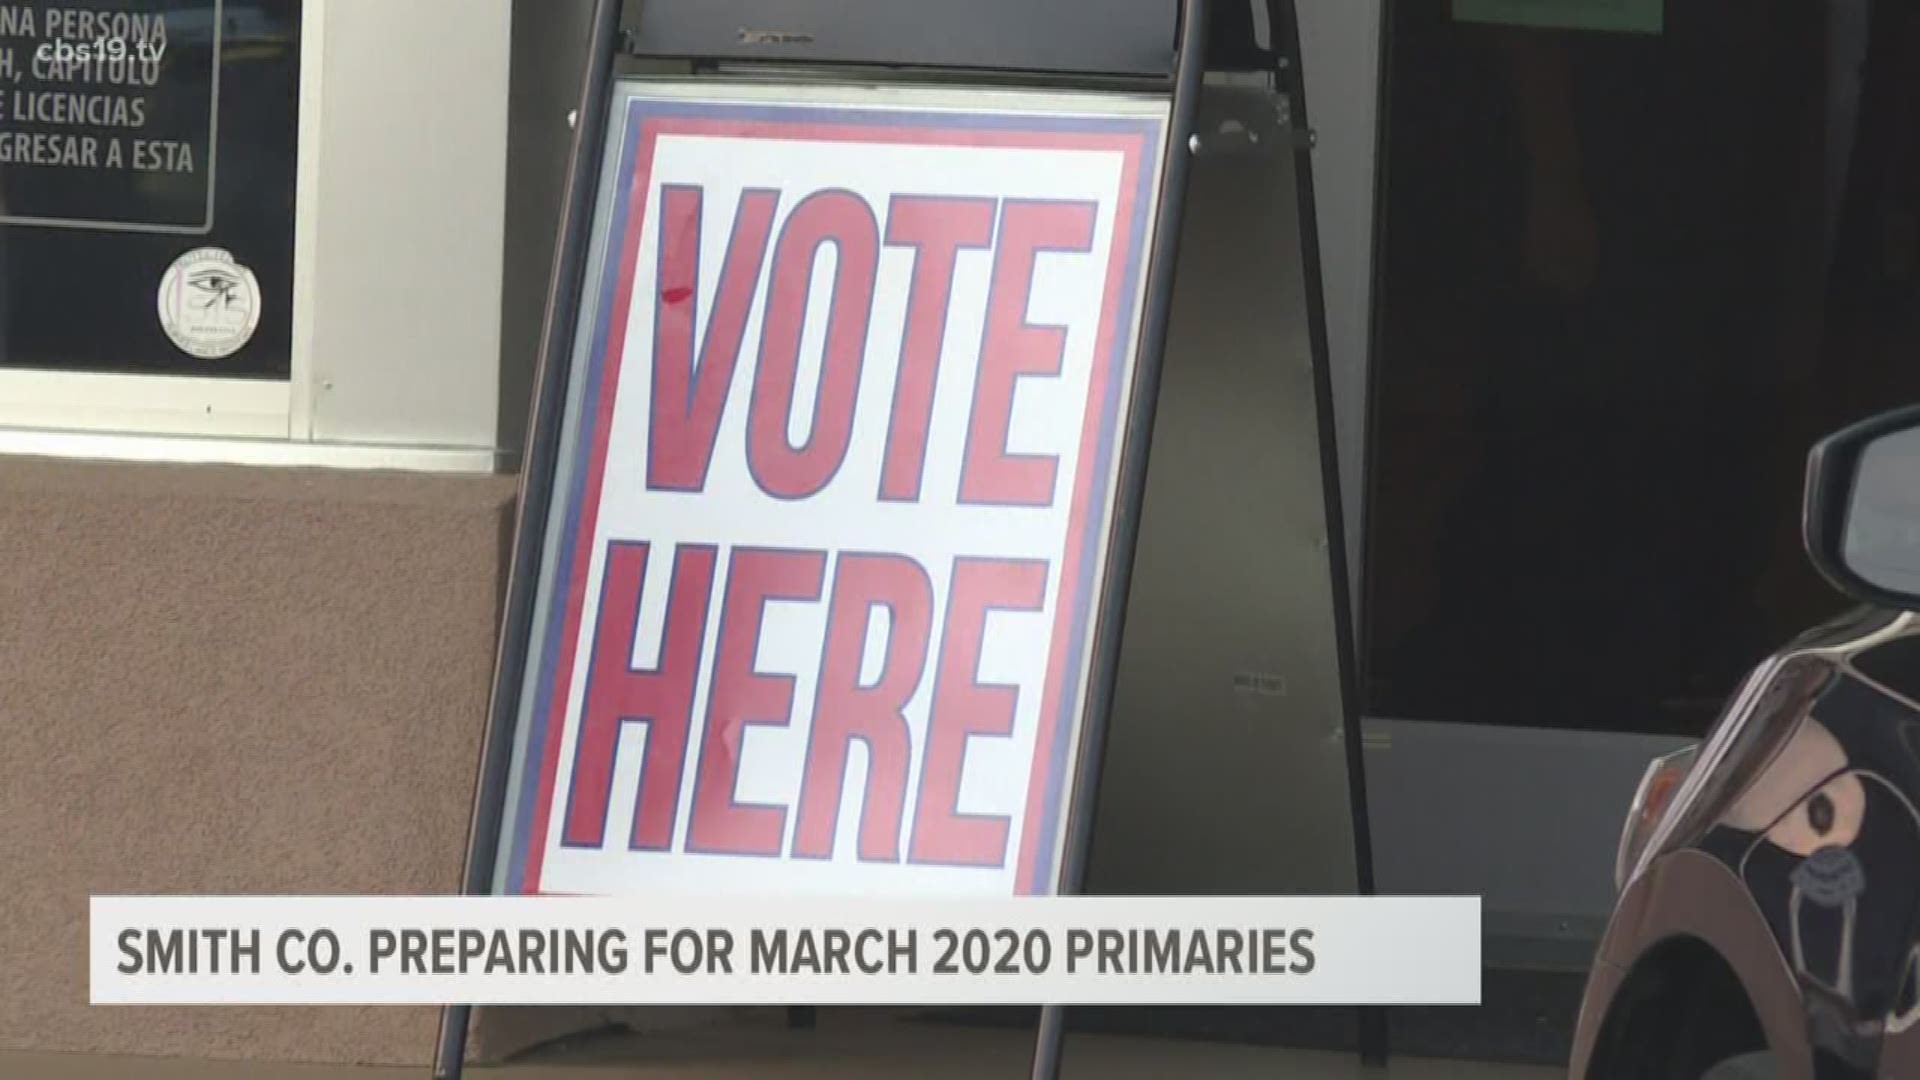 After connectivity issues affected Smith County during the last election, the Elections Office has been working to ensure things go smoothly for the primaries.